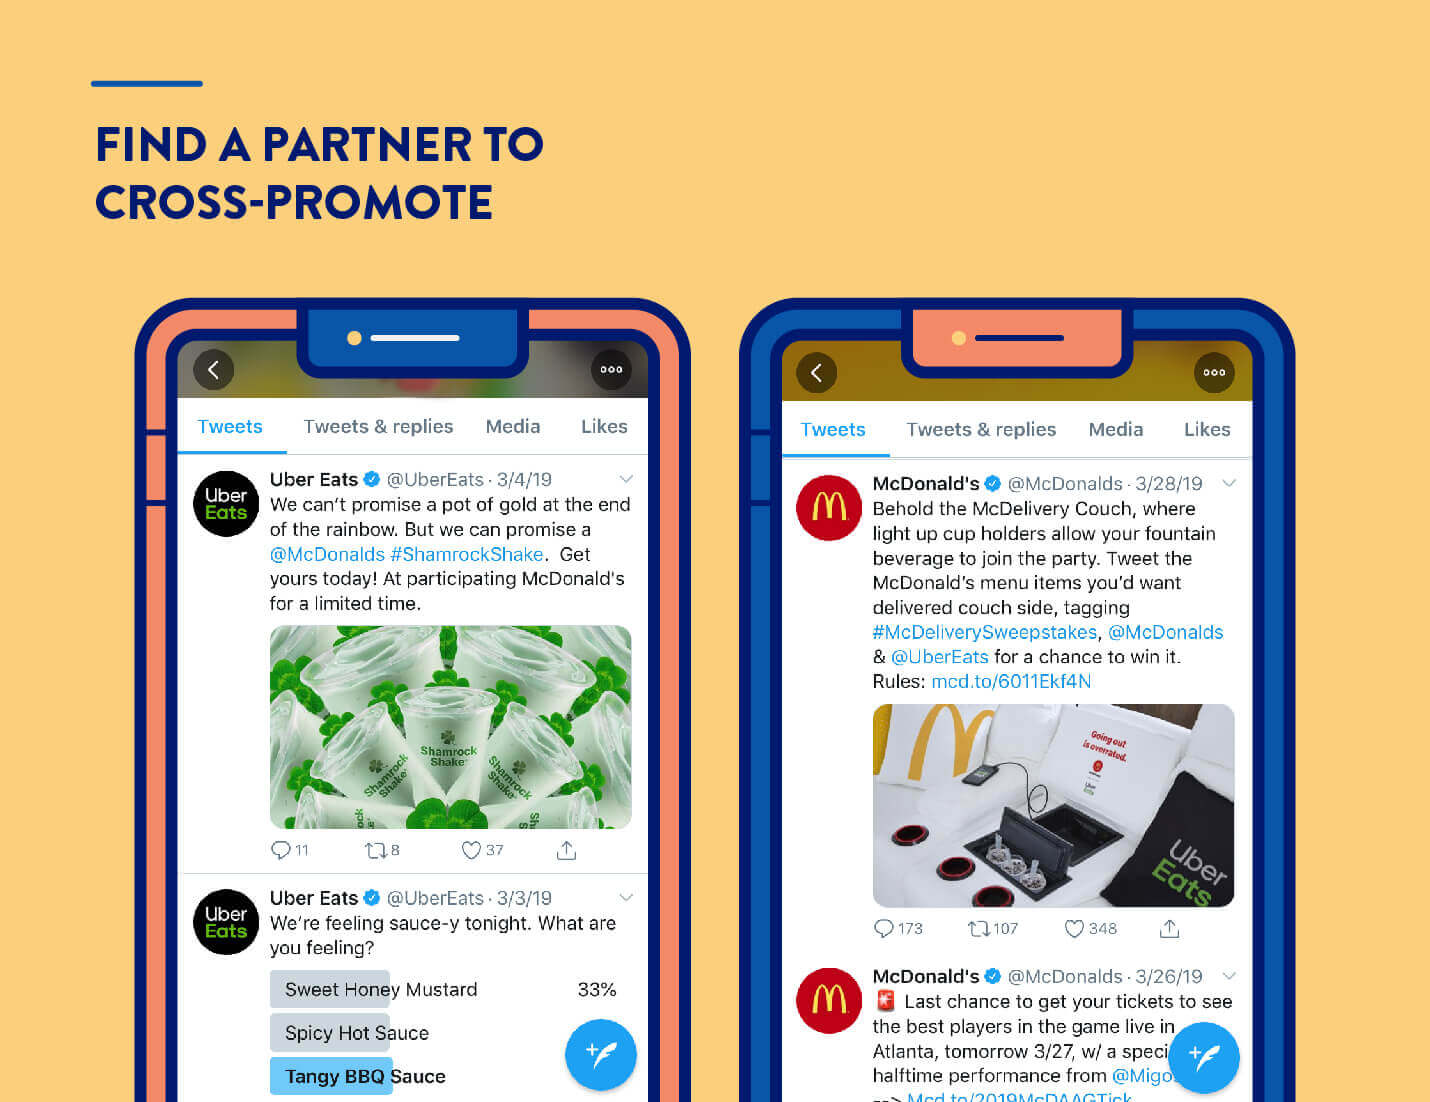 cross promotion app marketing strategy example from Uber Eats and Mcdonalds on Twitter